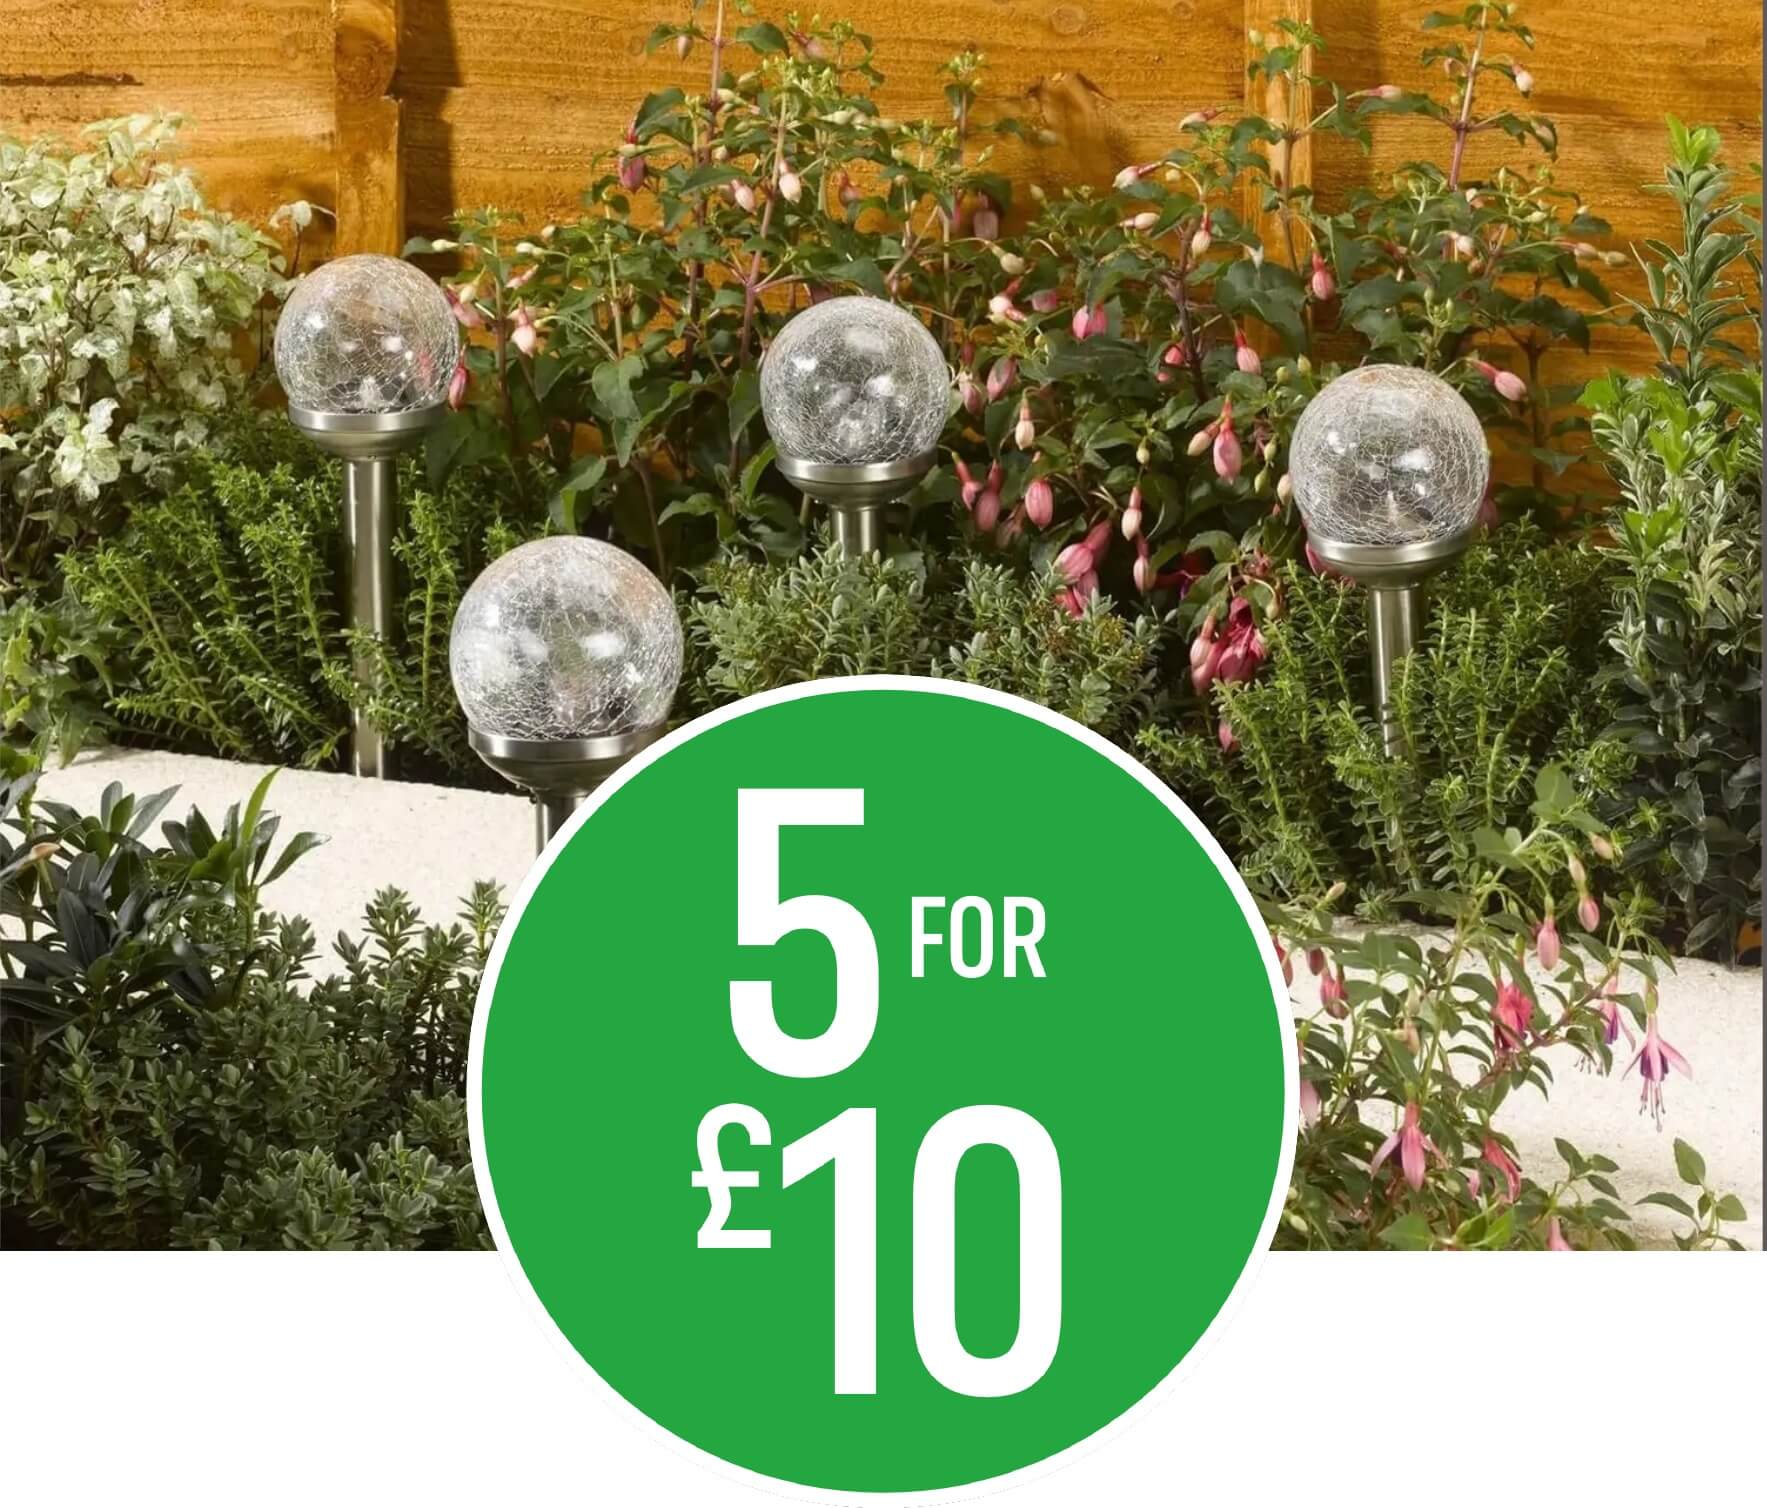 5 for £10 on Crackle Ball Solar Stake Lights